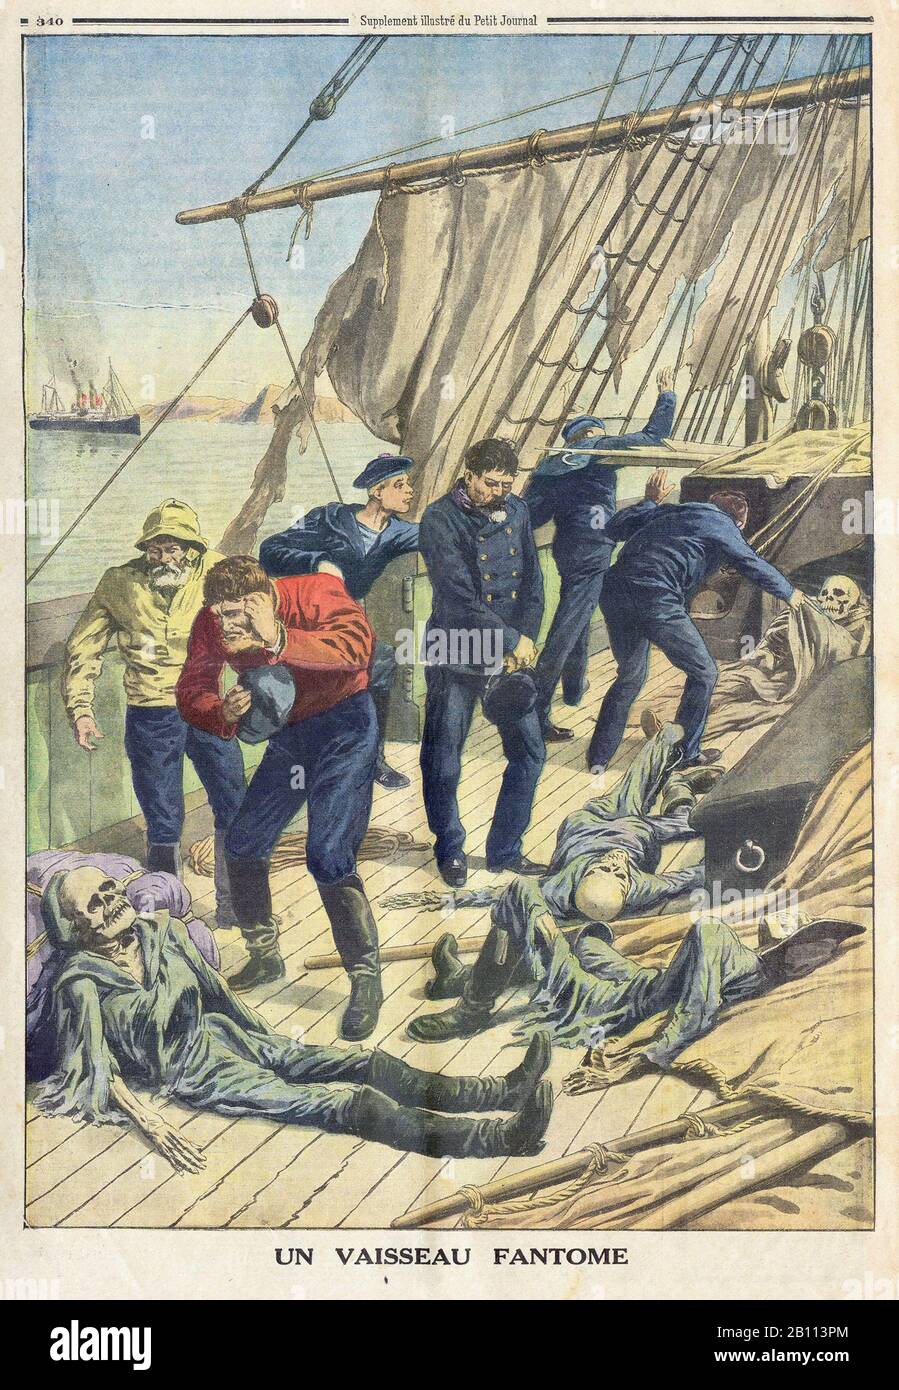 Un VAISSEAU FANTOME - UNA NAVE FANTOME - In 'le Petit Journal' French Illustrated Newspaper Foto Stock